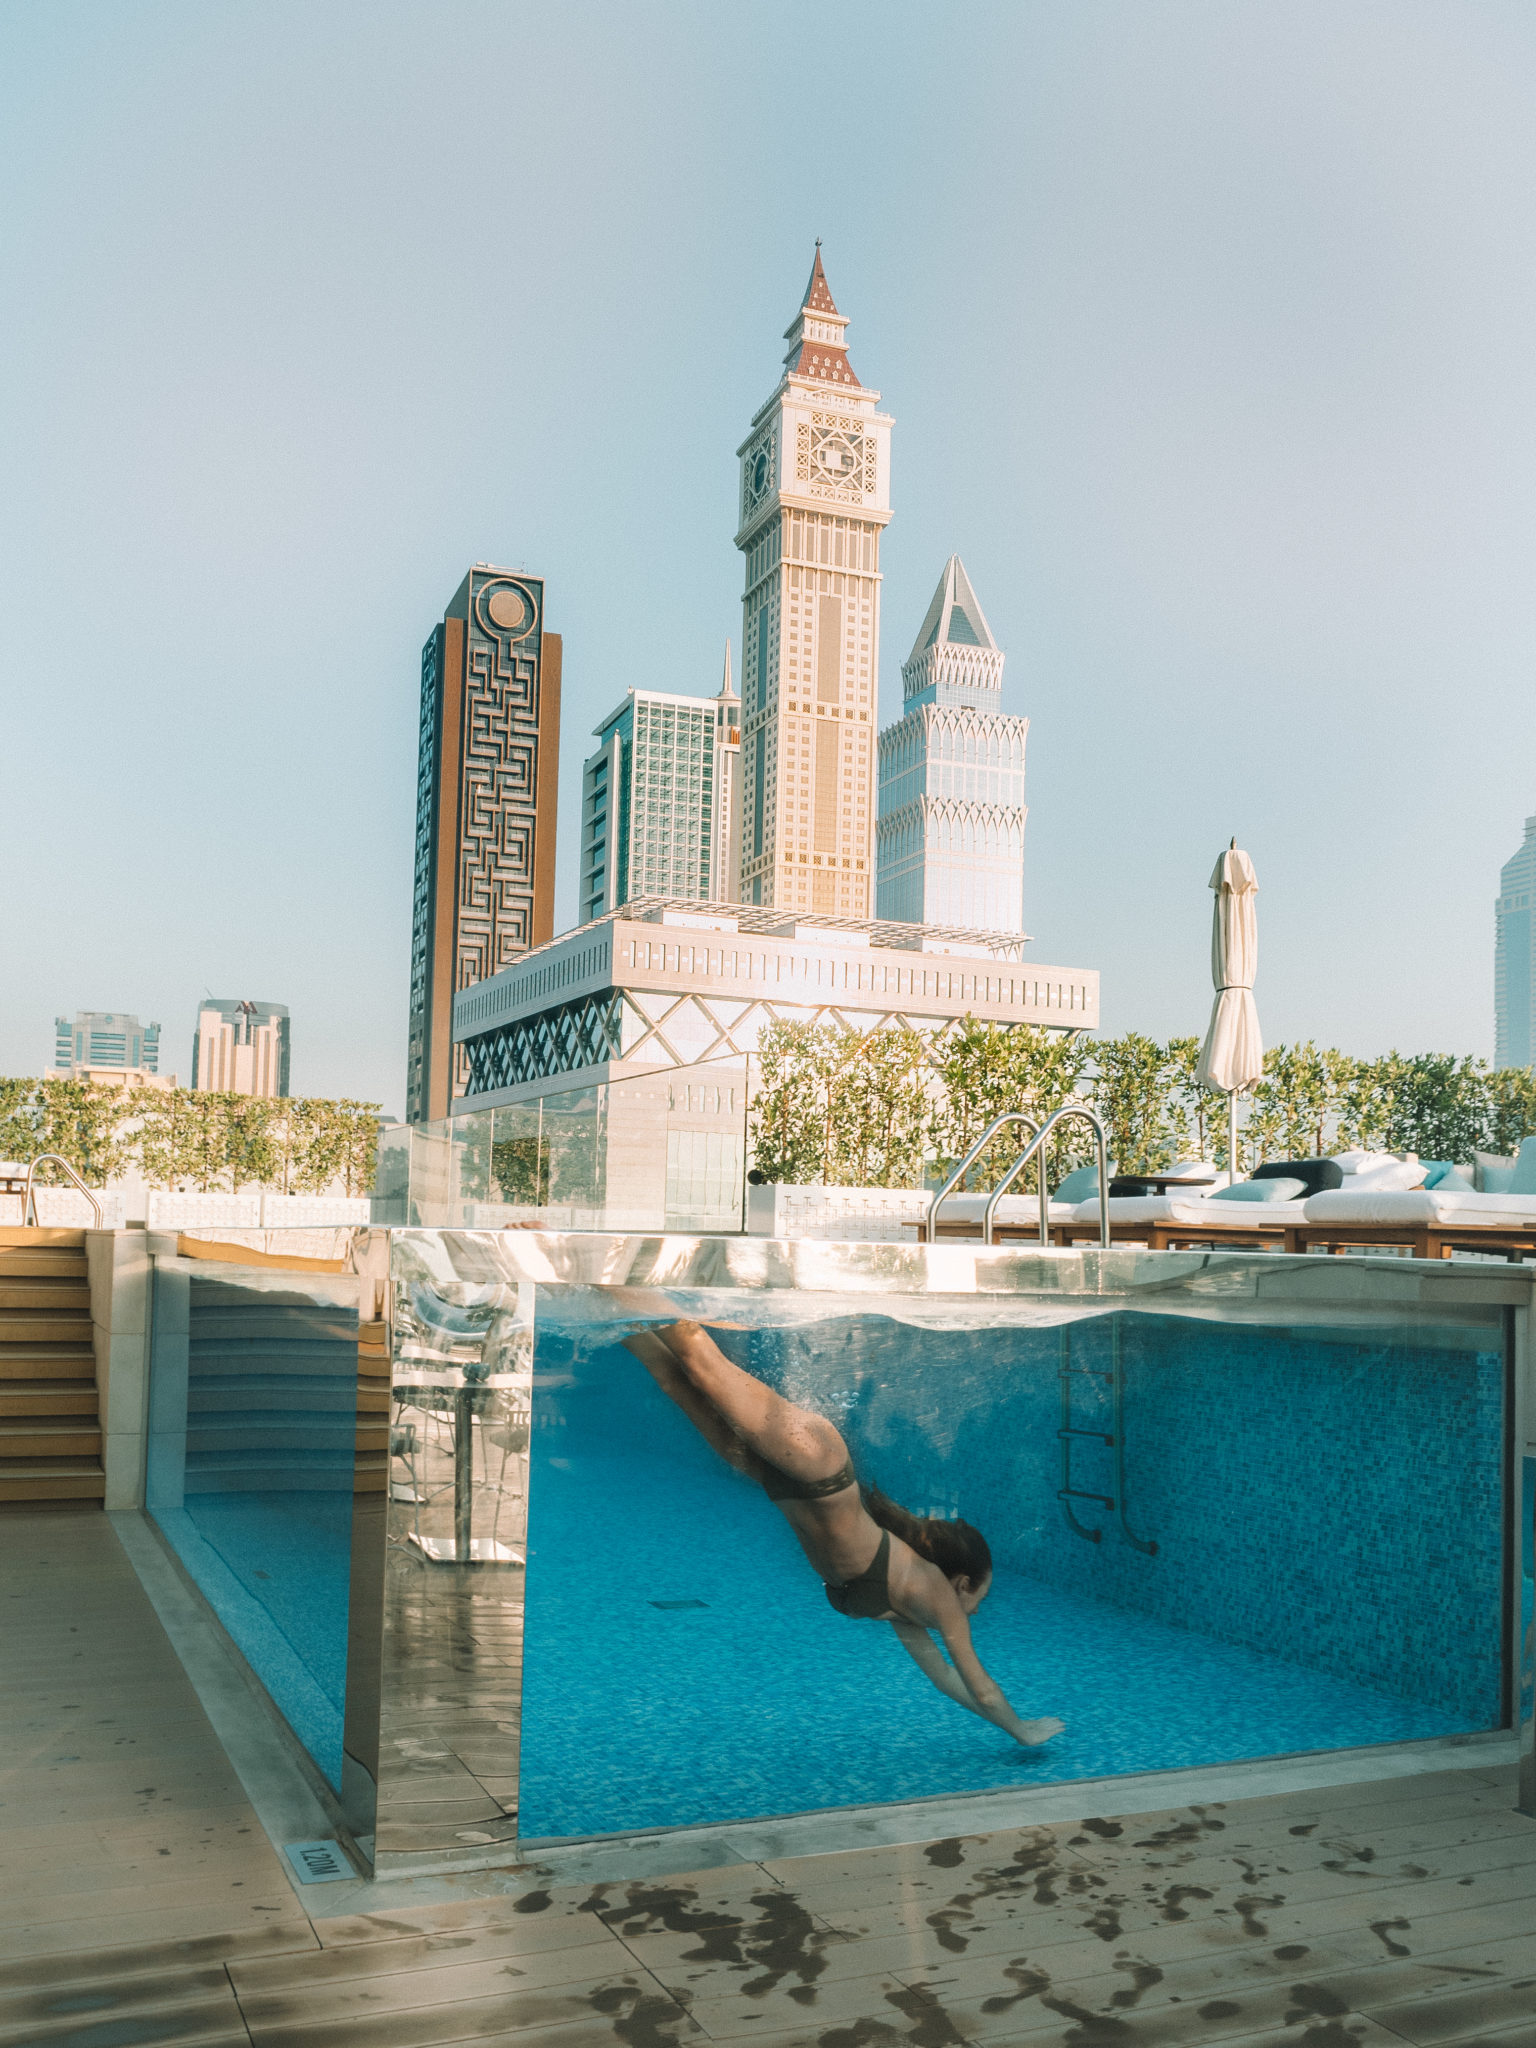 The Best Places to Snap an Instagram Photo in Dubai | WORLD OF WANDERLUST